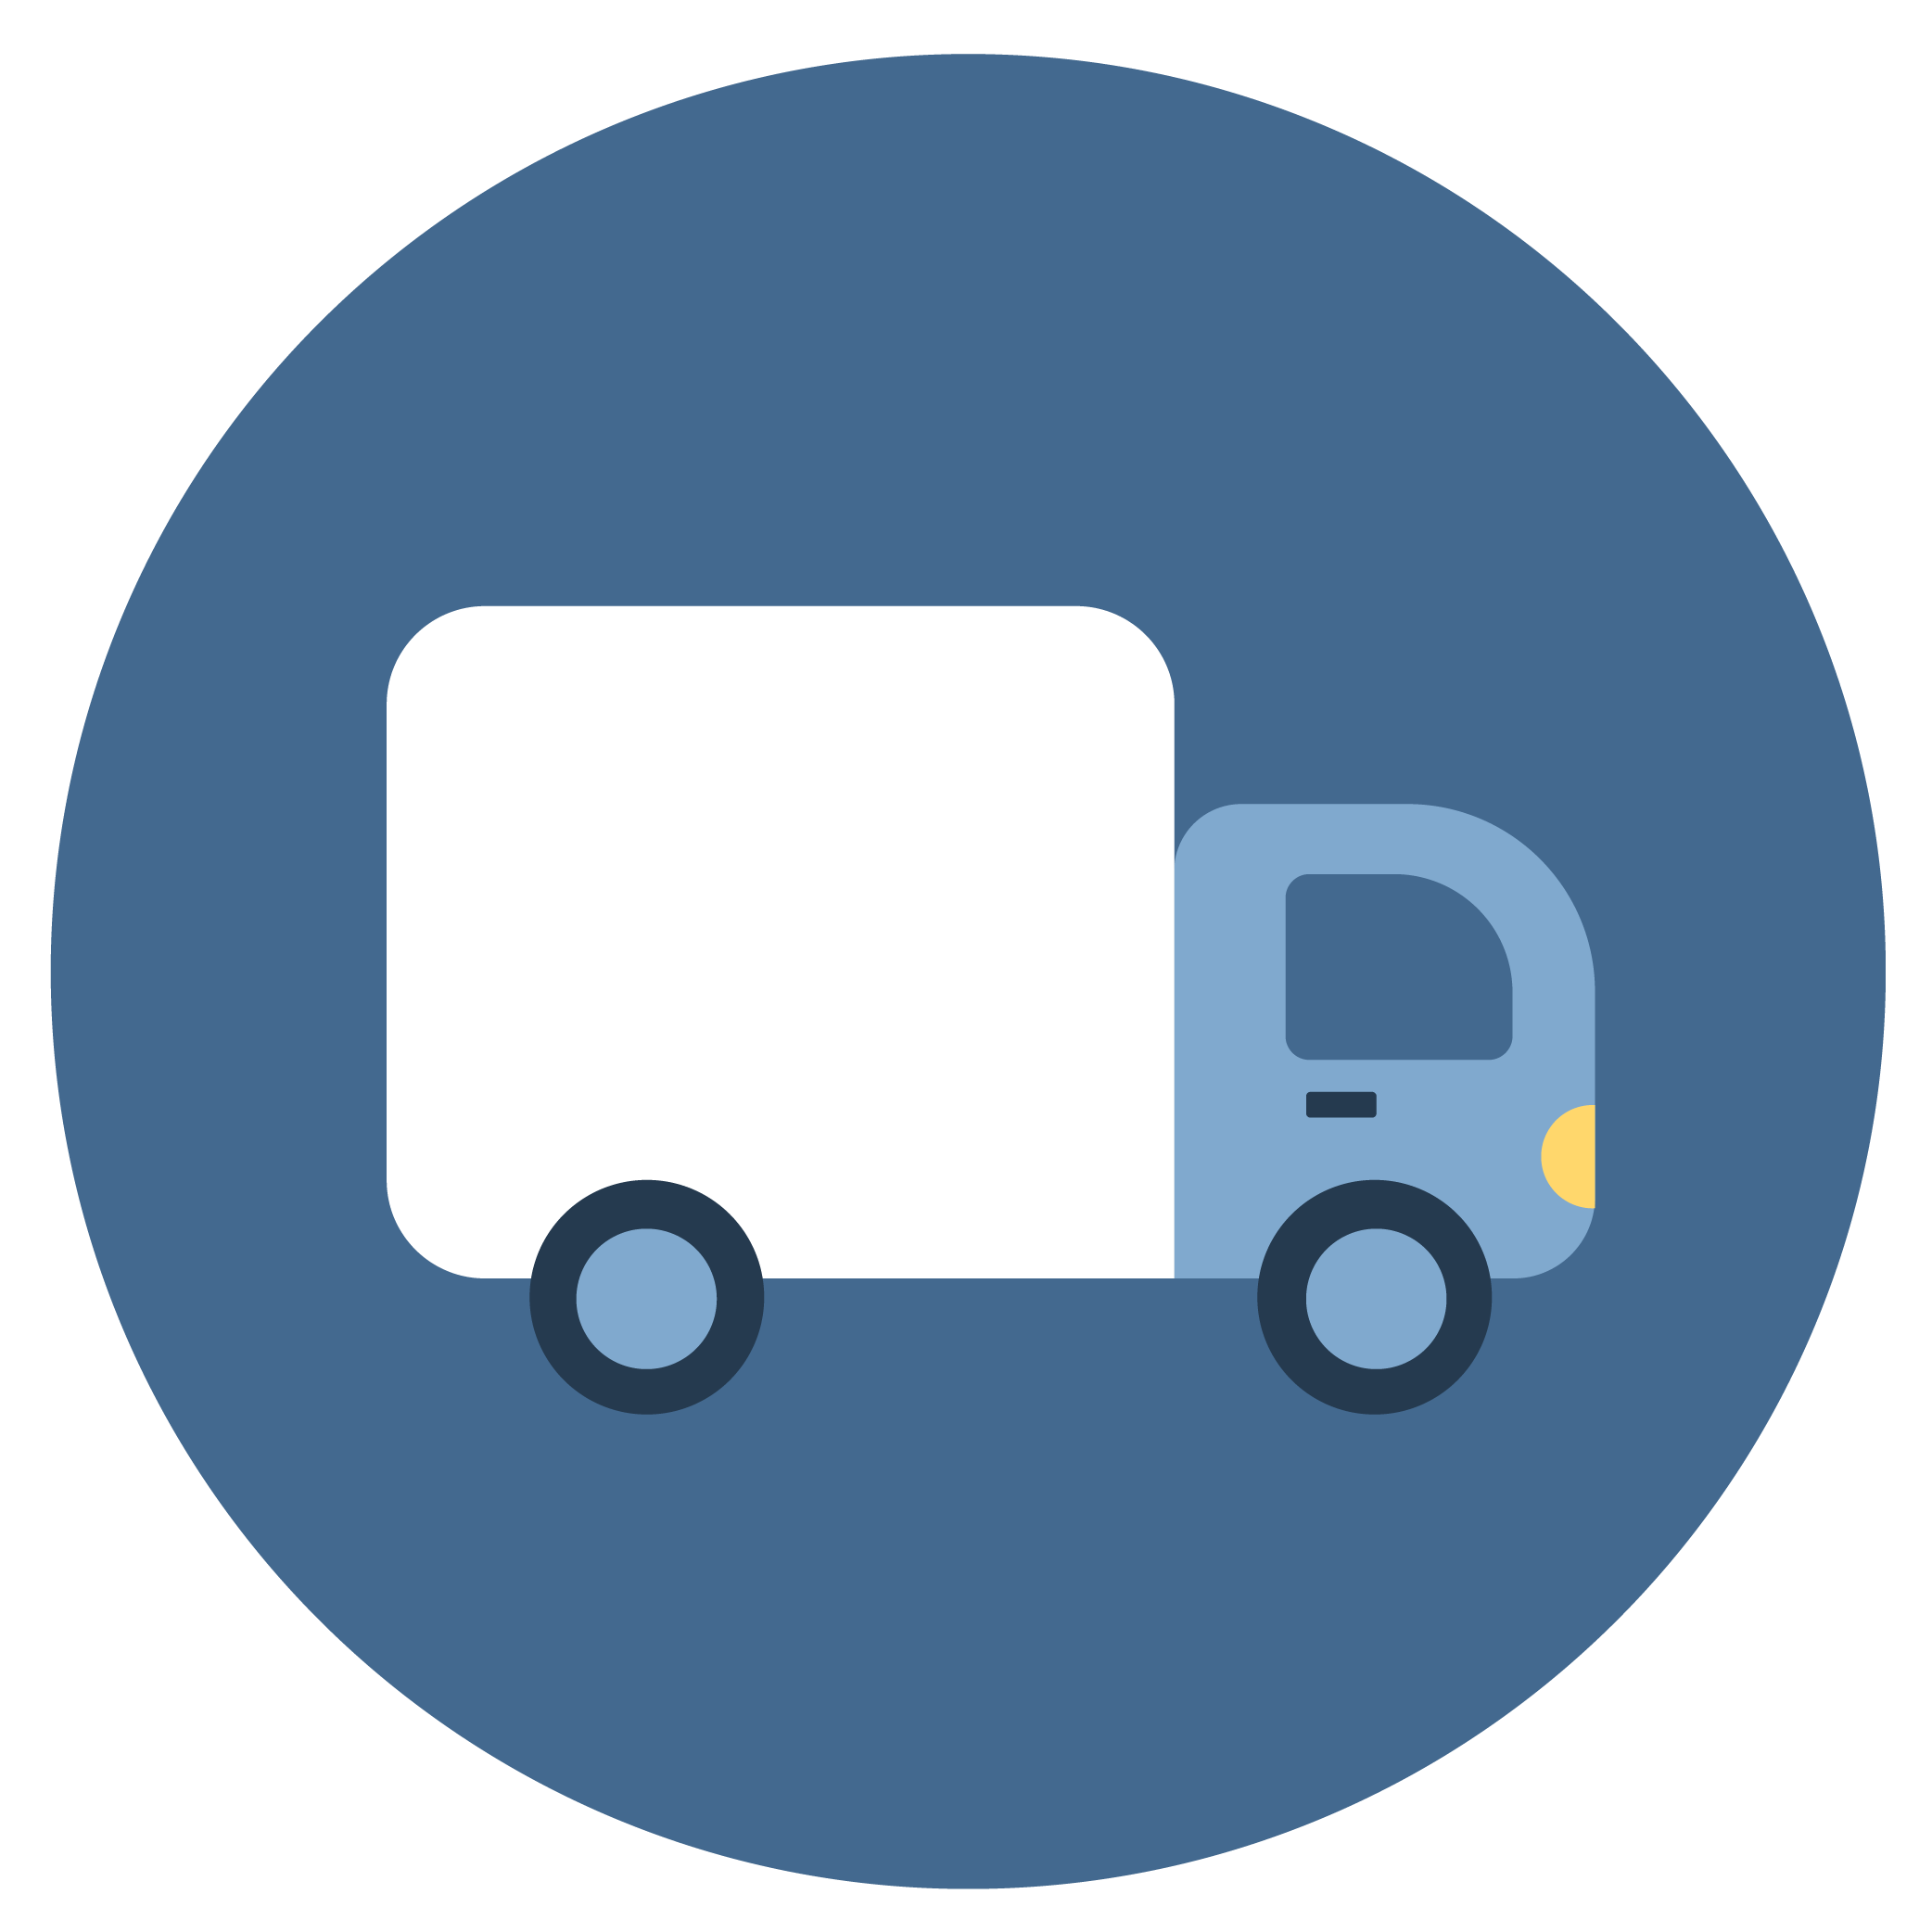 Truck icon. Click the image to go to our Dispose, Recycle, or Treat page.